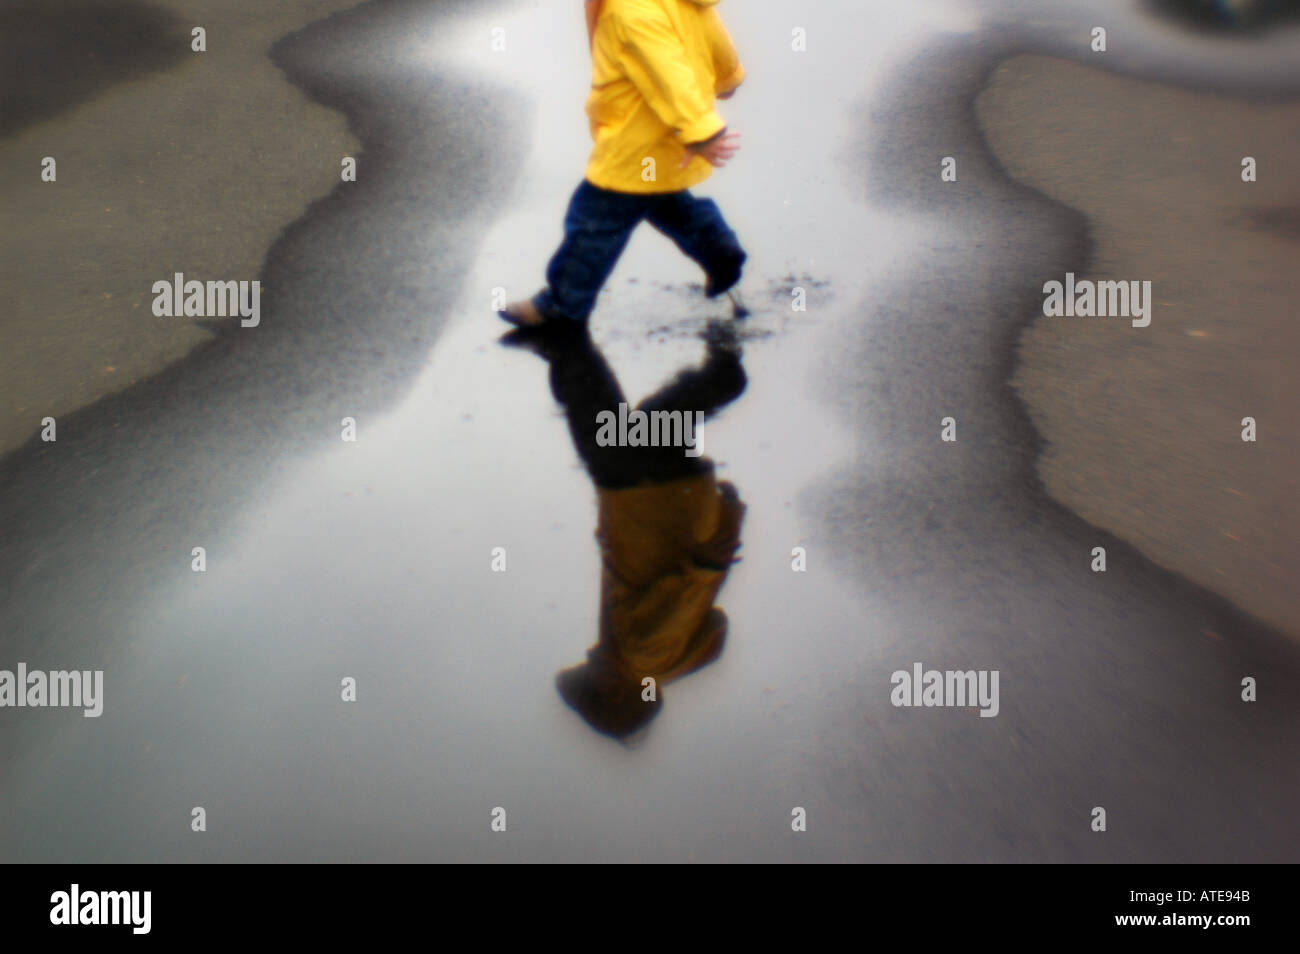 Small boy yellow jacket playing in puddle of water Stock Photo